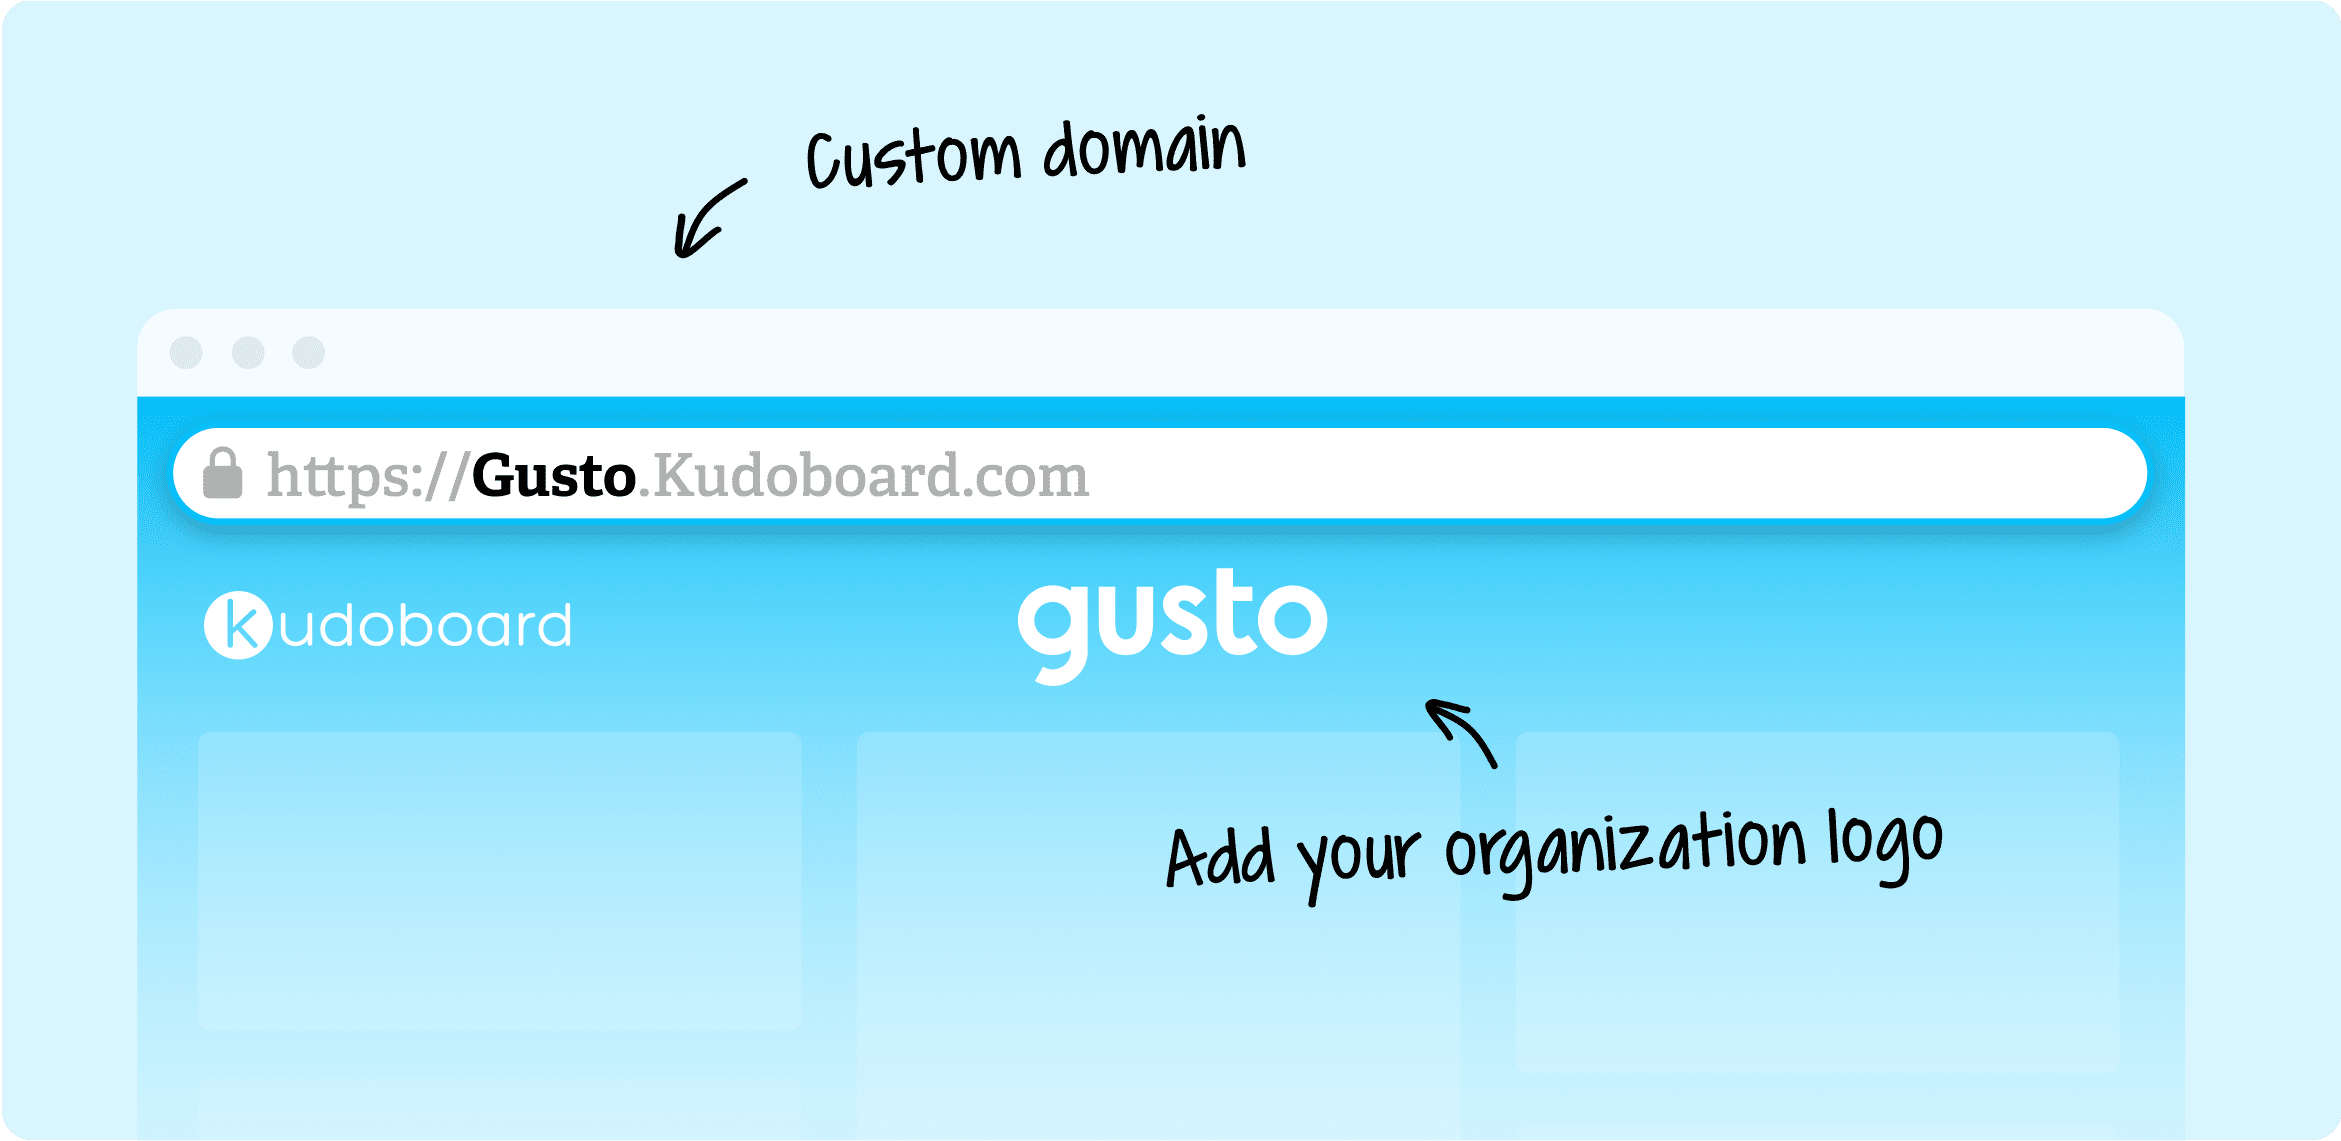 Browser window with custom domain for organization